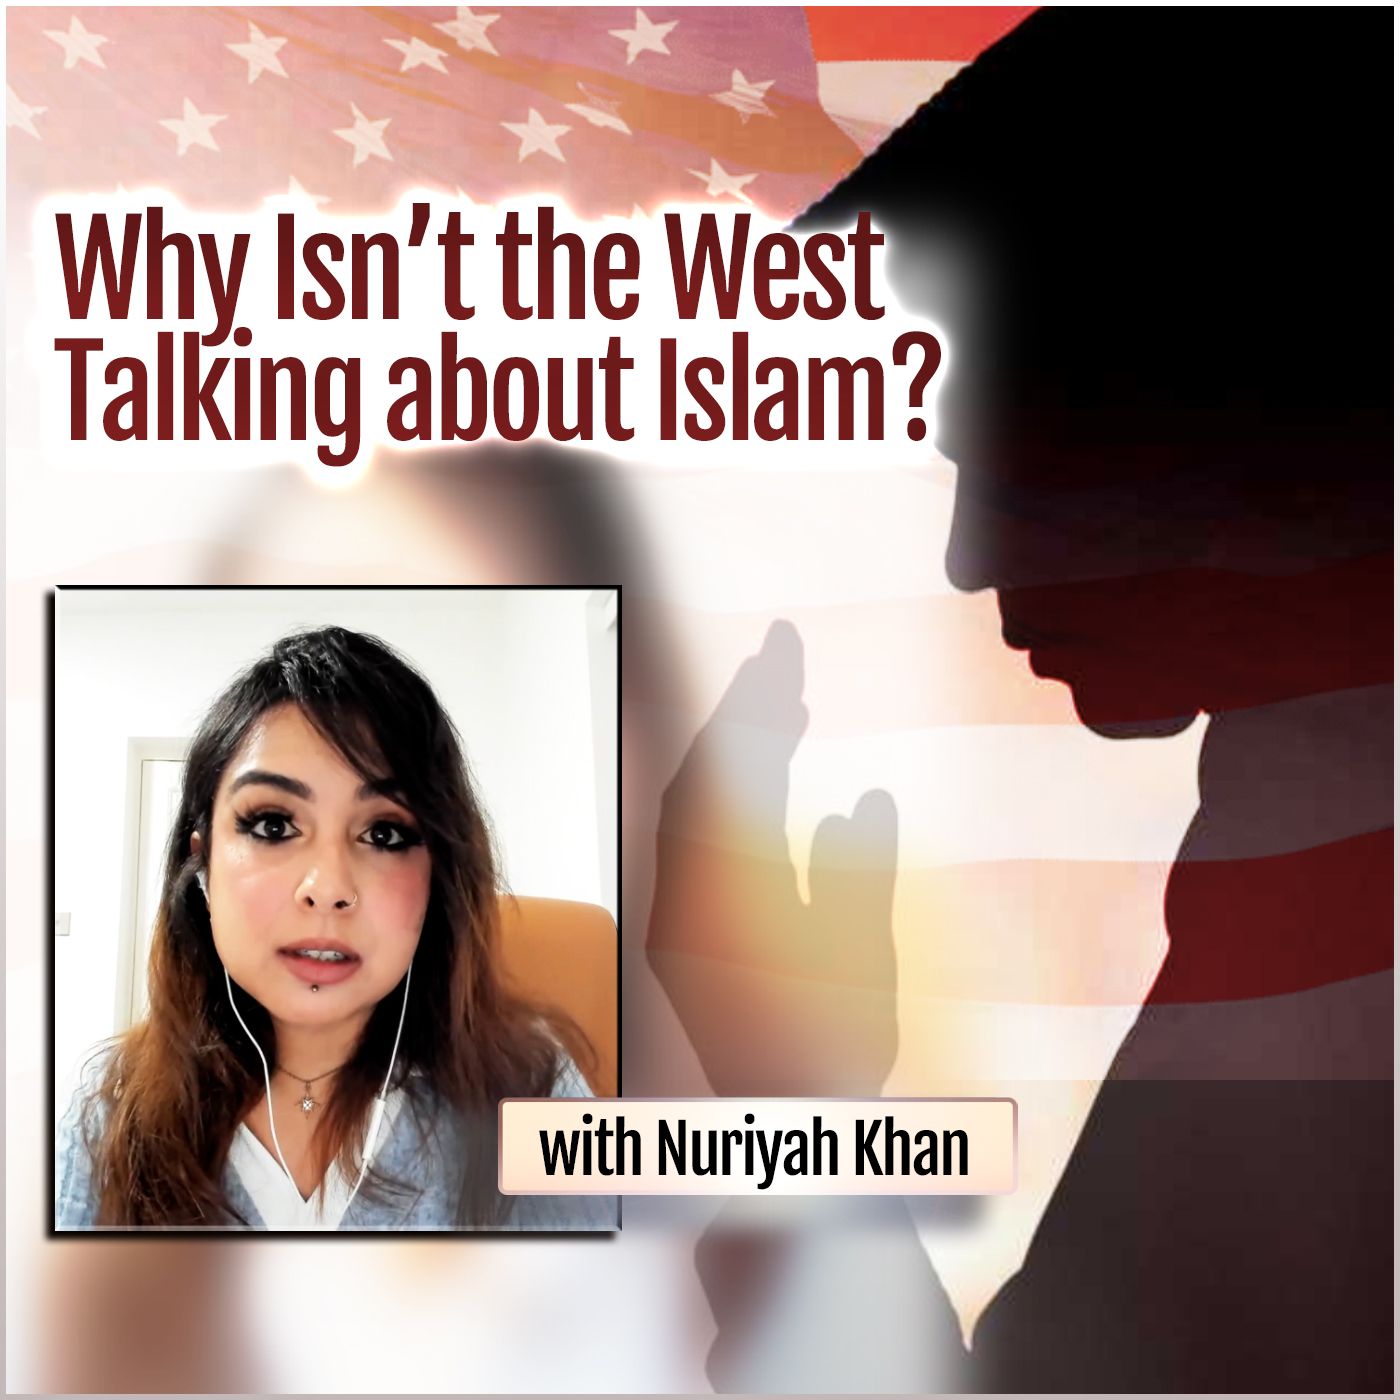 Why Isn’t the West Talking about Islam? (with Nuriyah Khan)